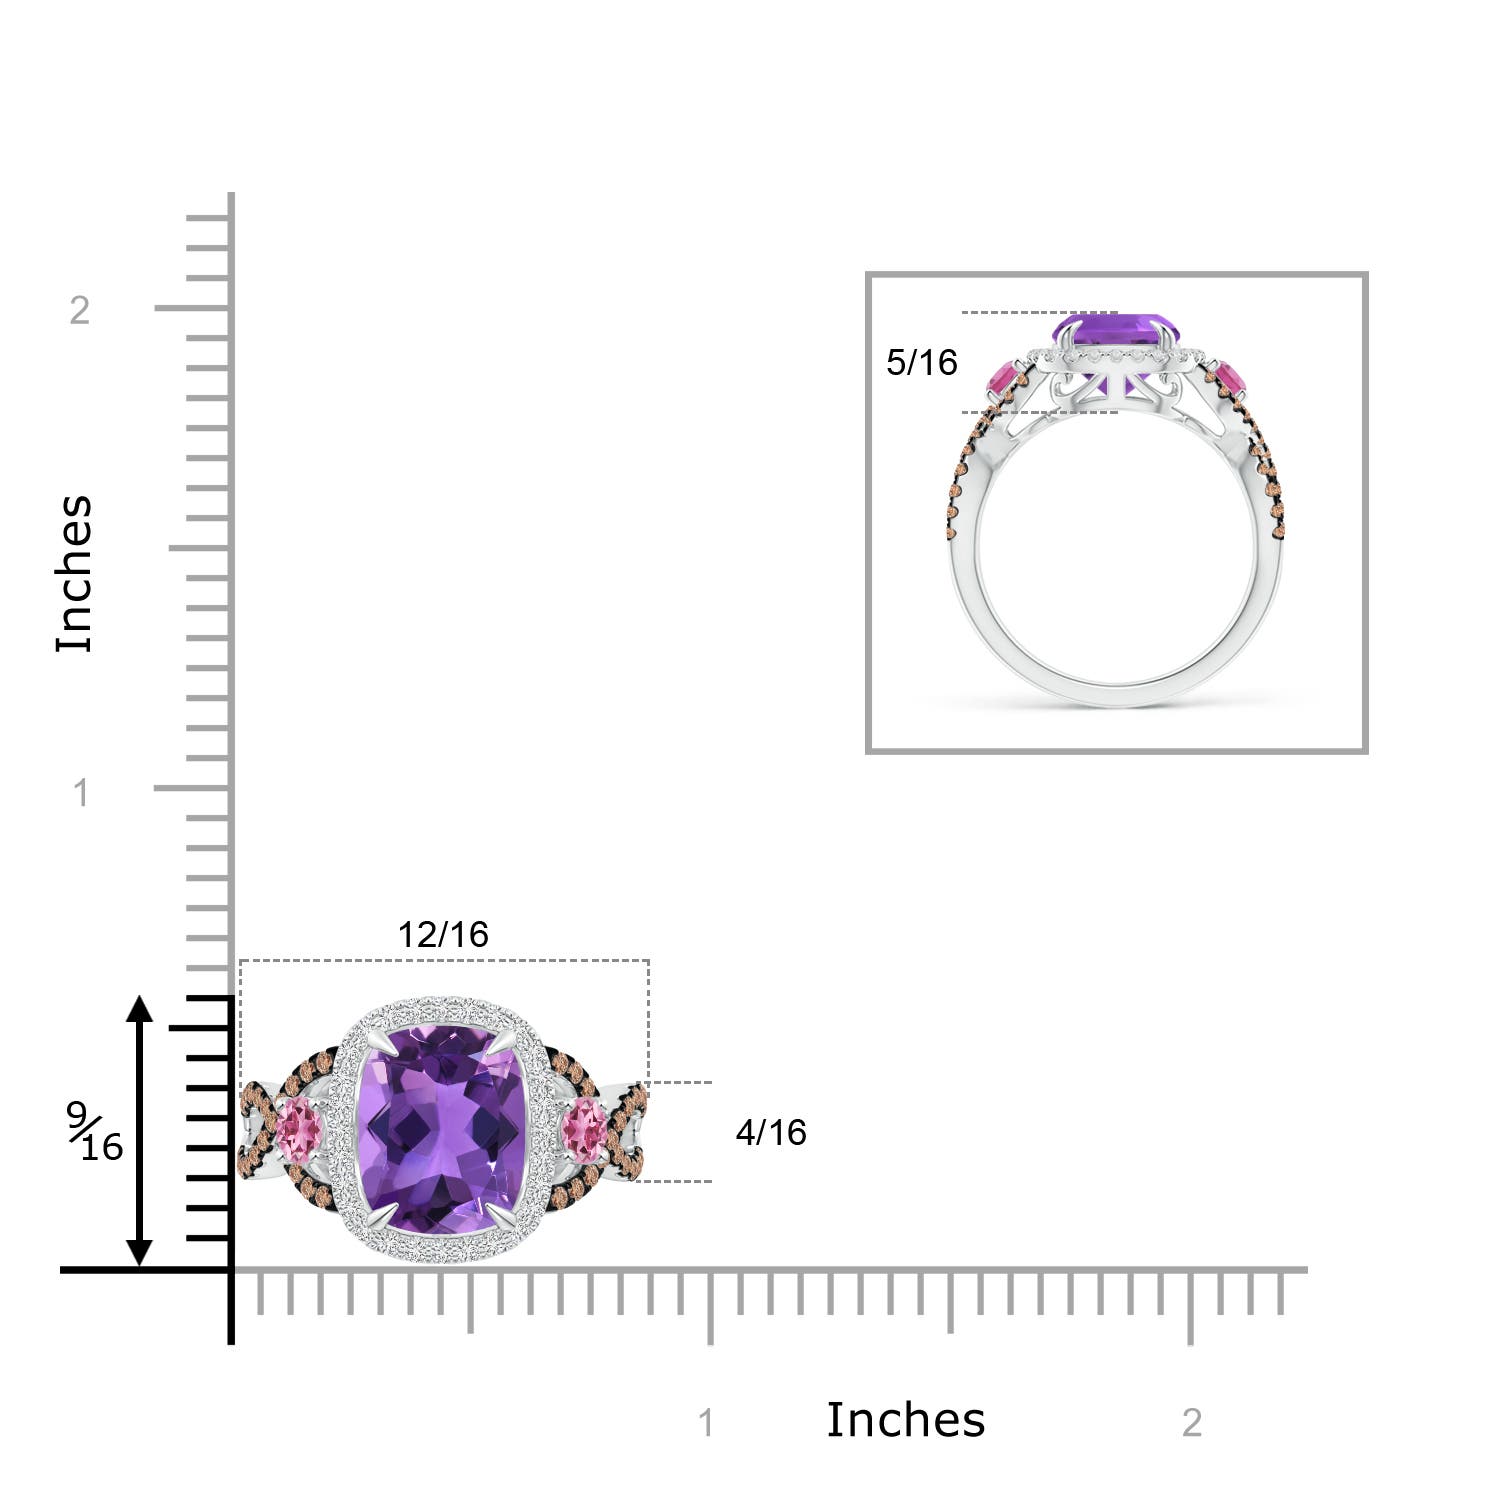 AAA - Amethyst / 4.4 CT / 14 KT White Gold